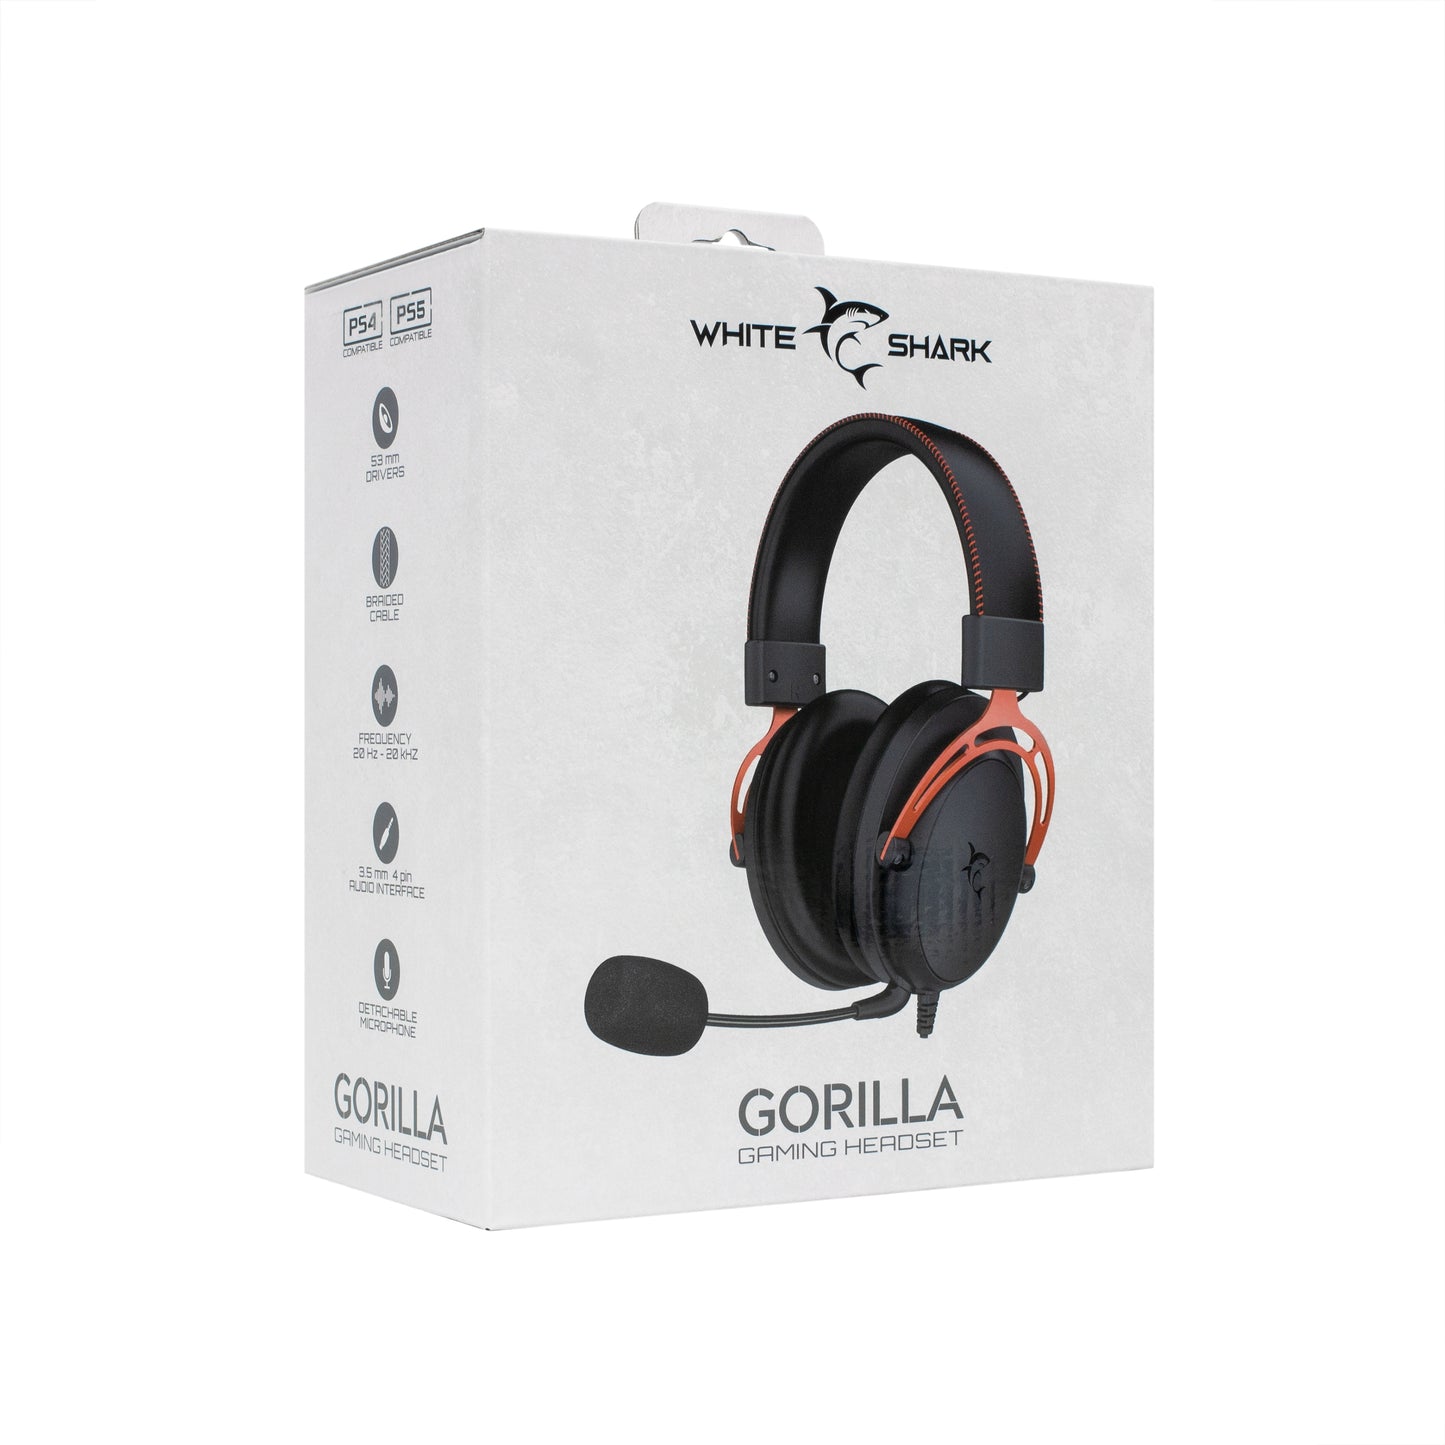 Gaming headset with microphone, White Shark Gorilla GH-2341 Black/Red